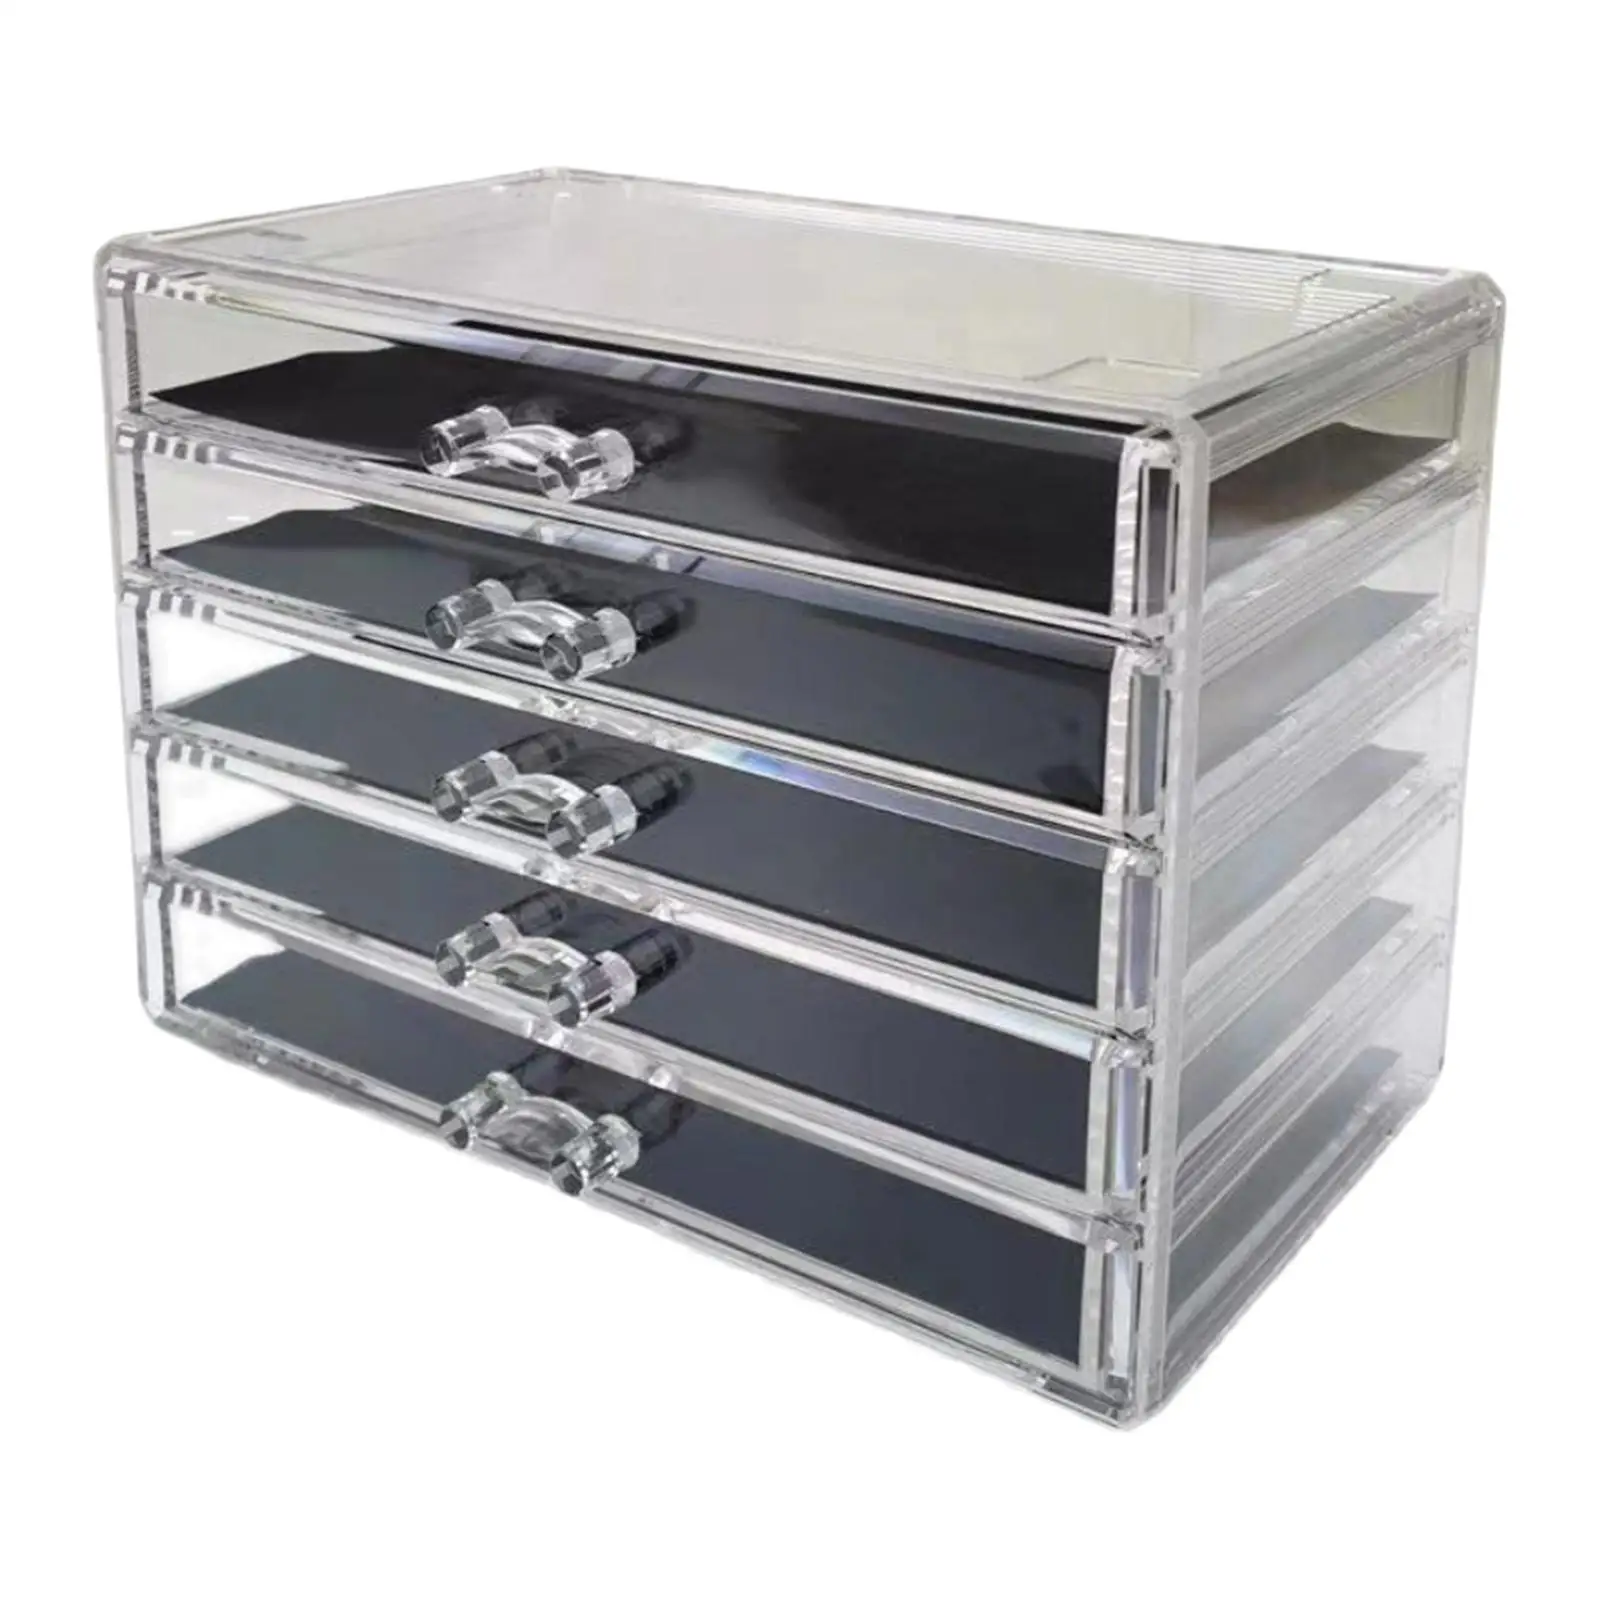 Cosmetics Makeup and Jewelry Storage Organizer Case Display Boxes for Bathroom, Dresser Case